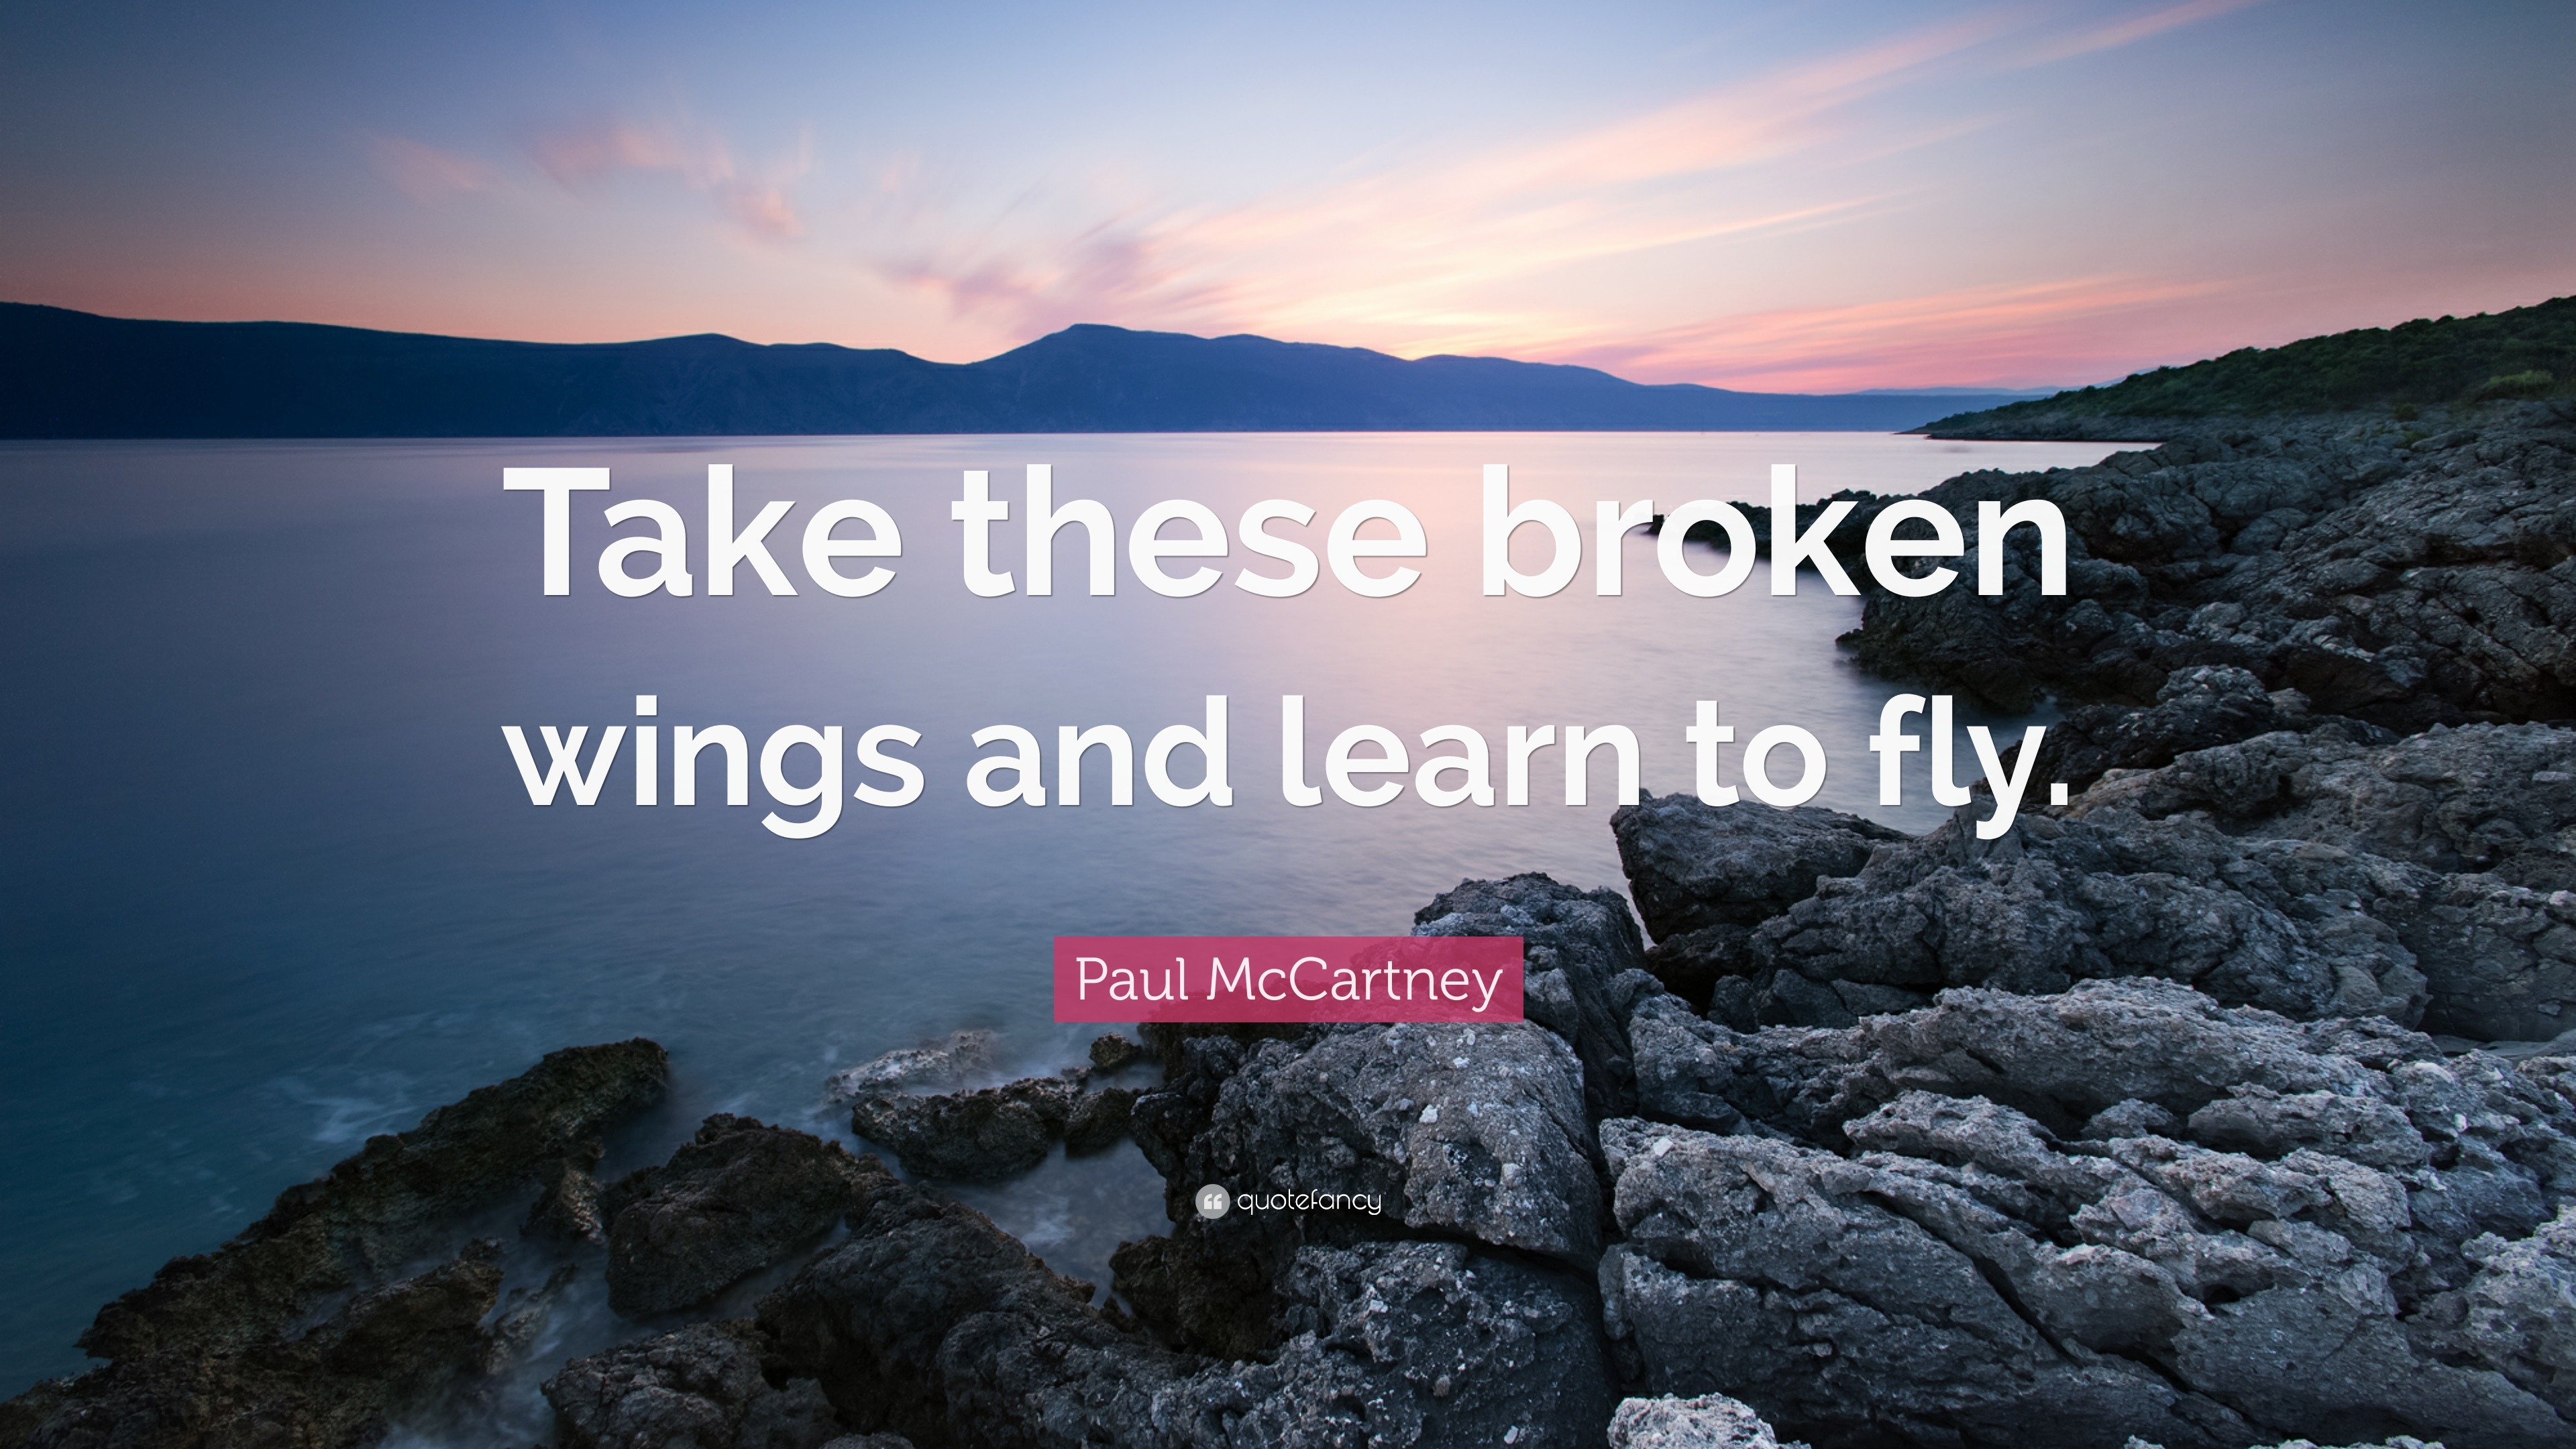 Quote: “Take these broken wings